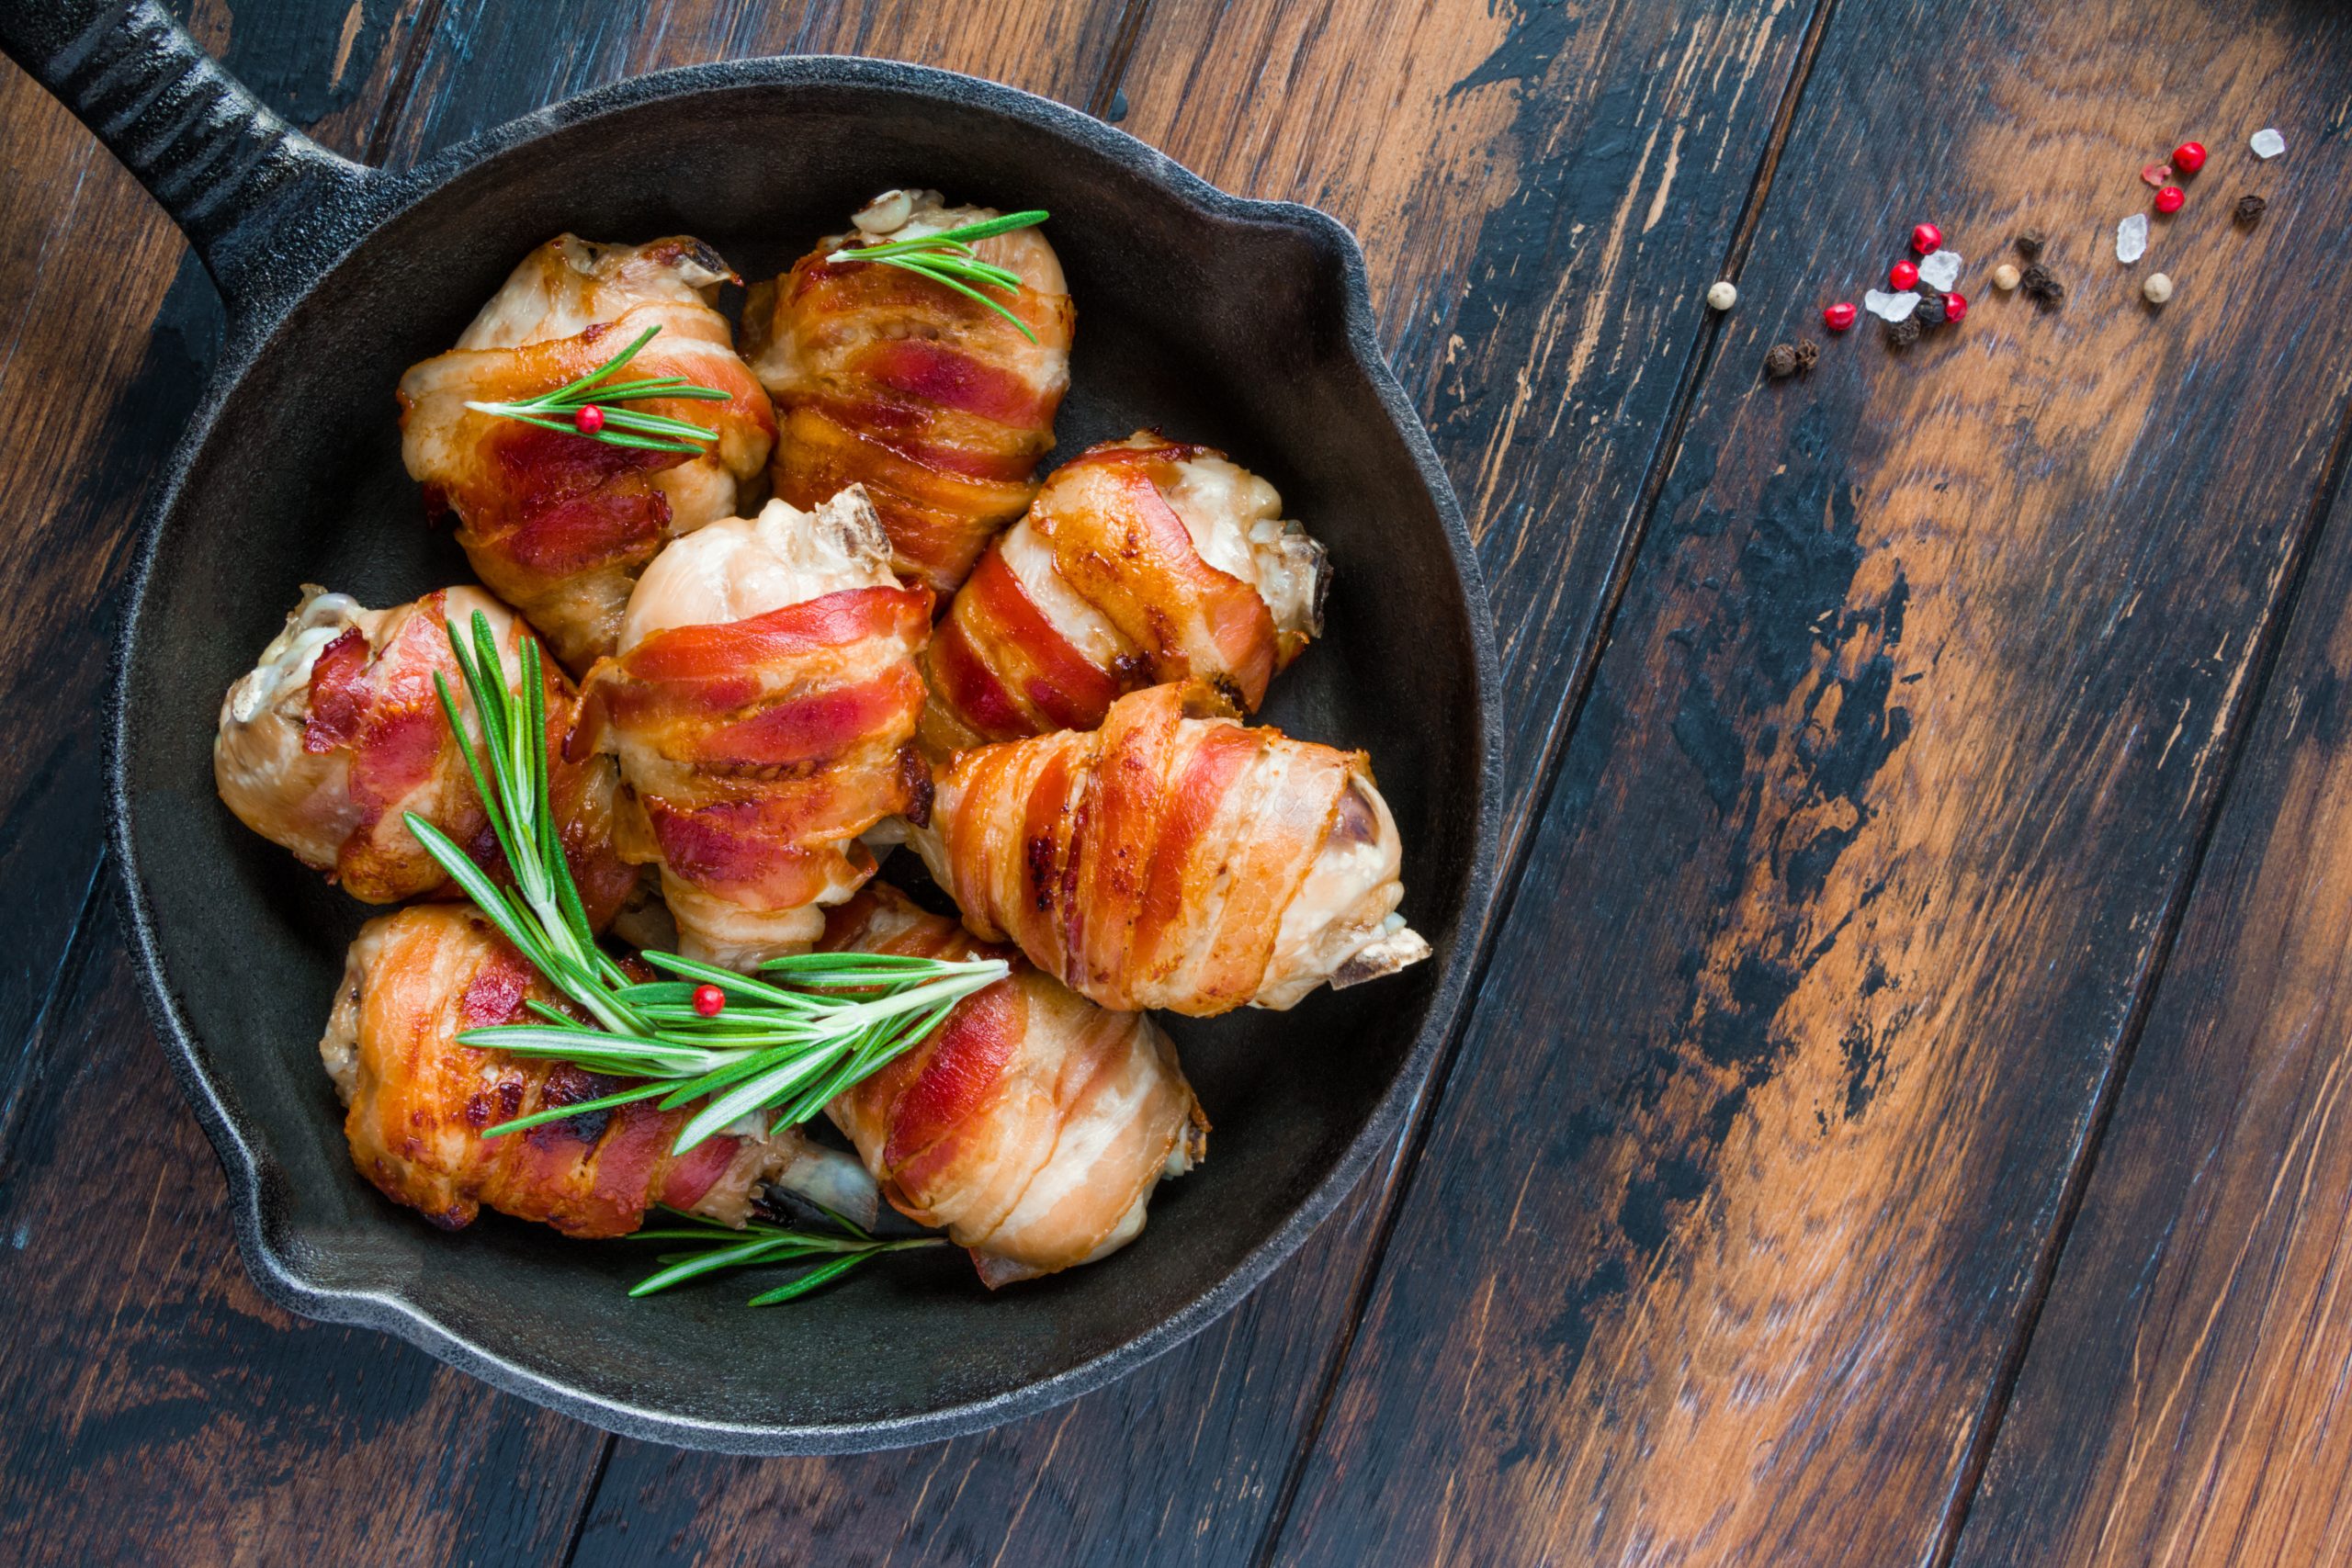 Bacon,Wrapped,Chicken,Drumsticks,In,A,Black,Cast-iron,Skillet,On